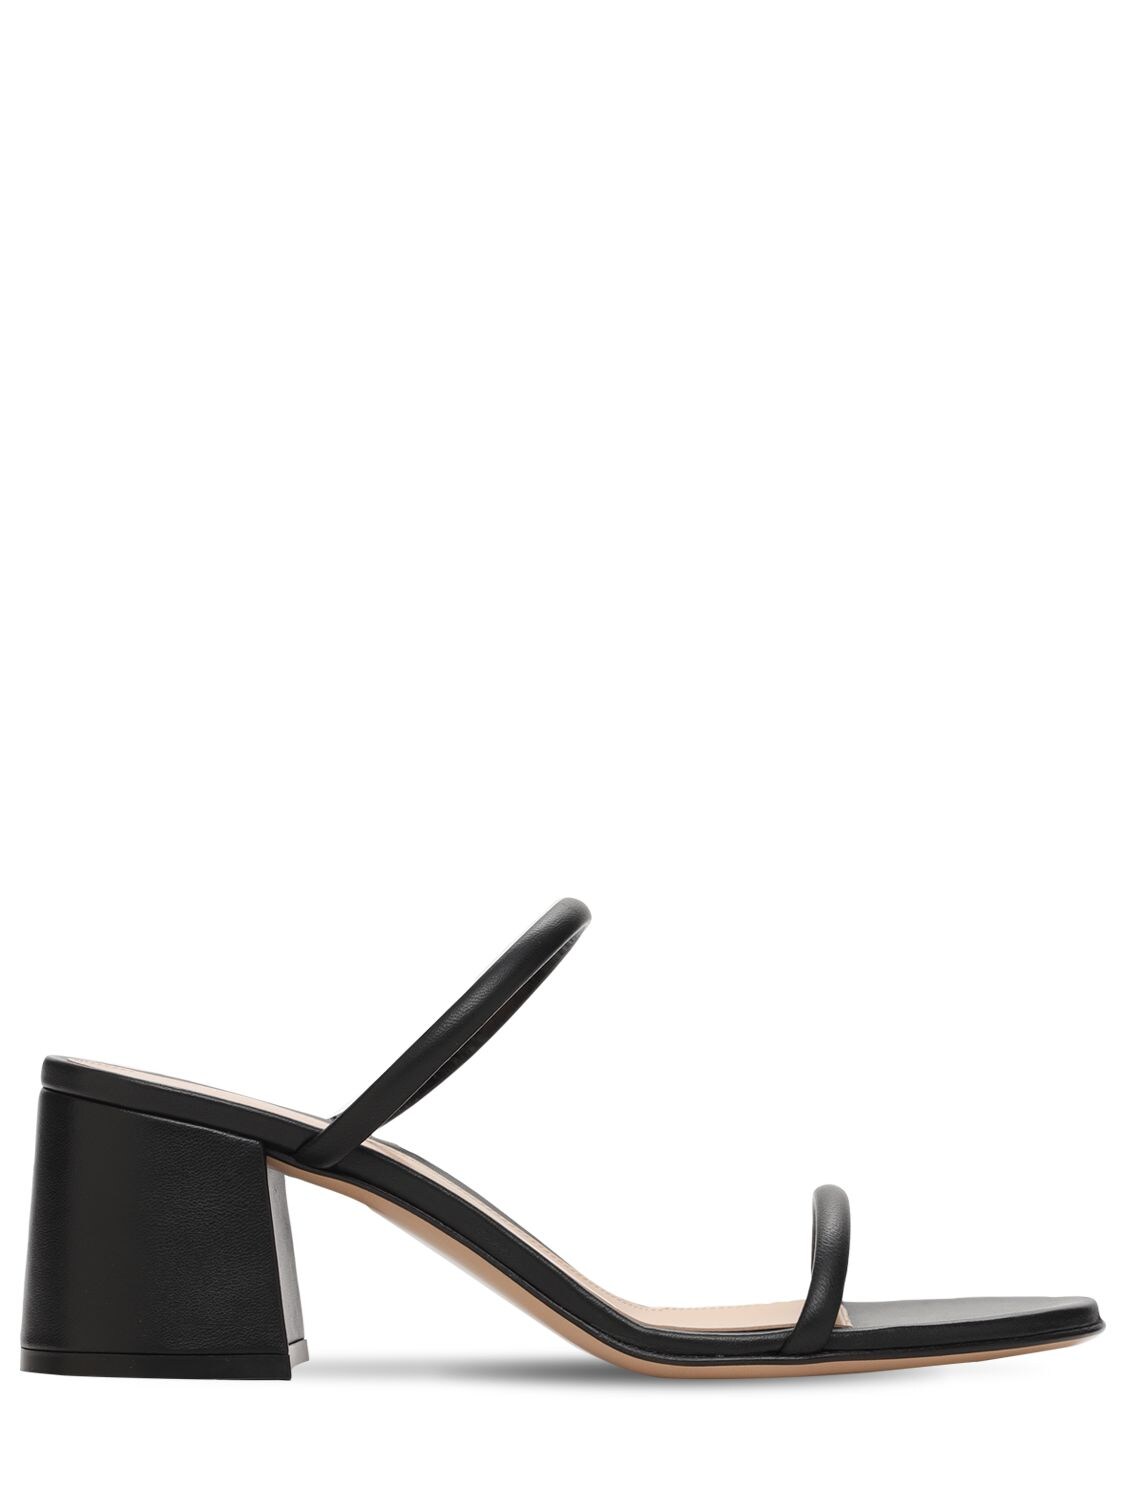 Gianvito Rossi 60mm Byblos Leather Sandals In Black